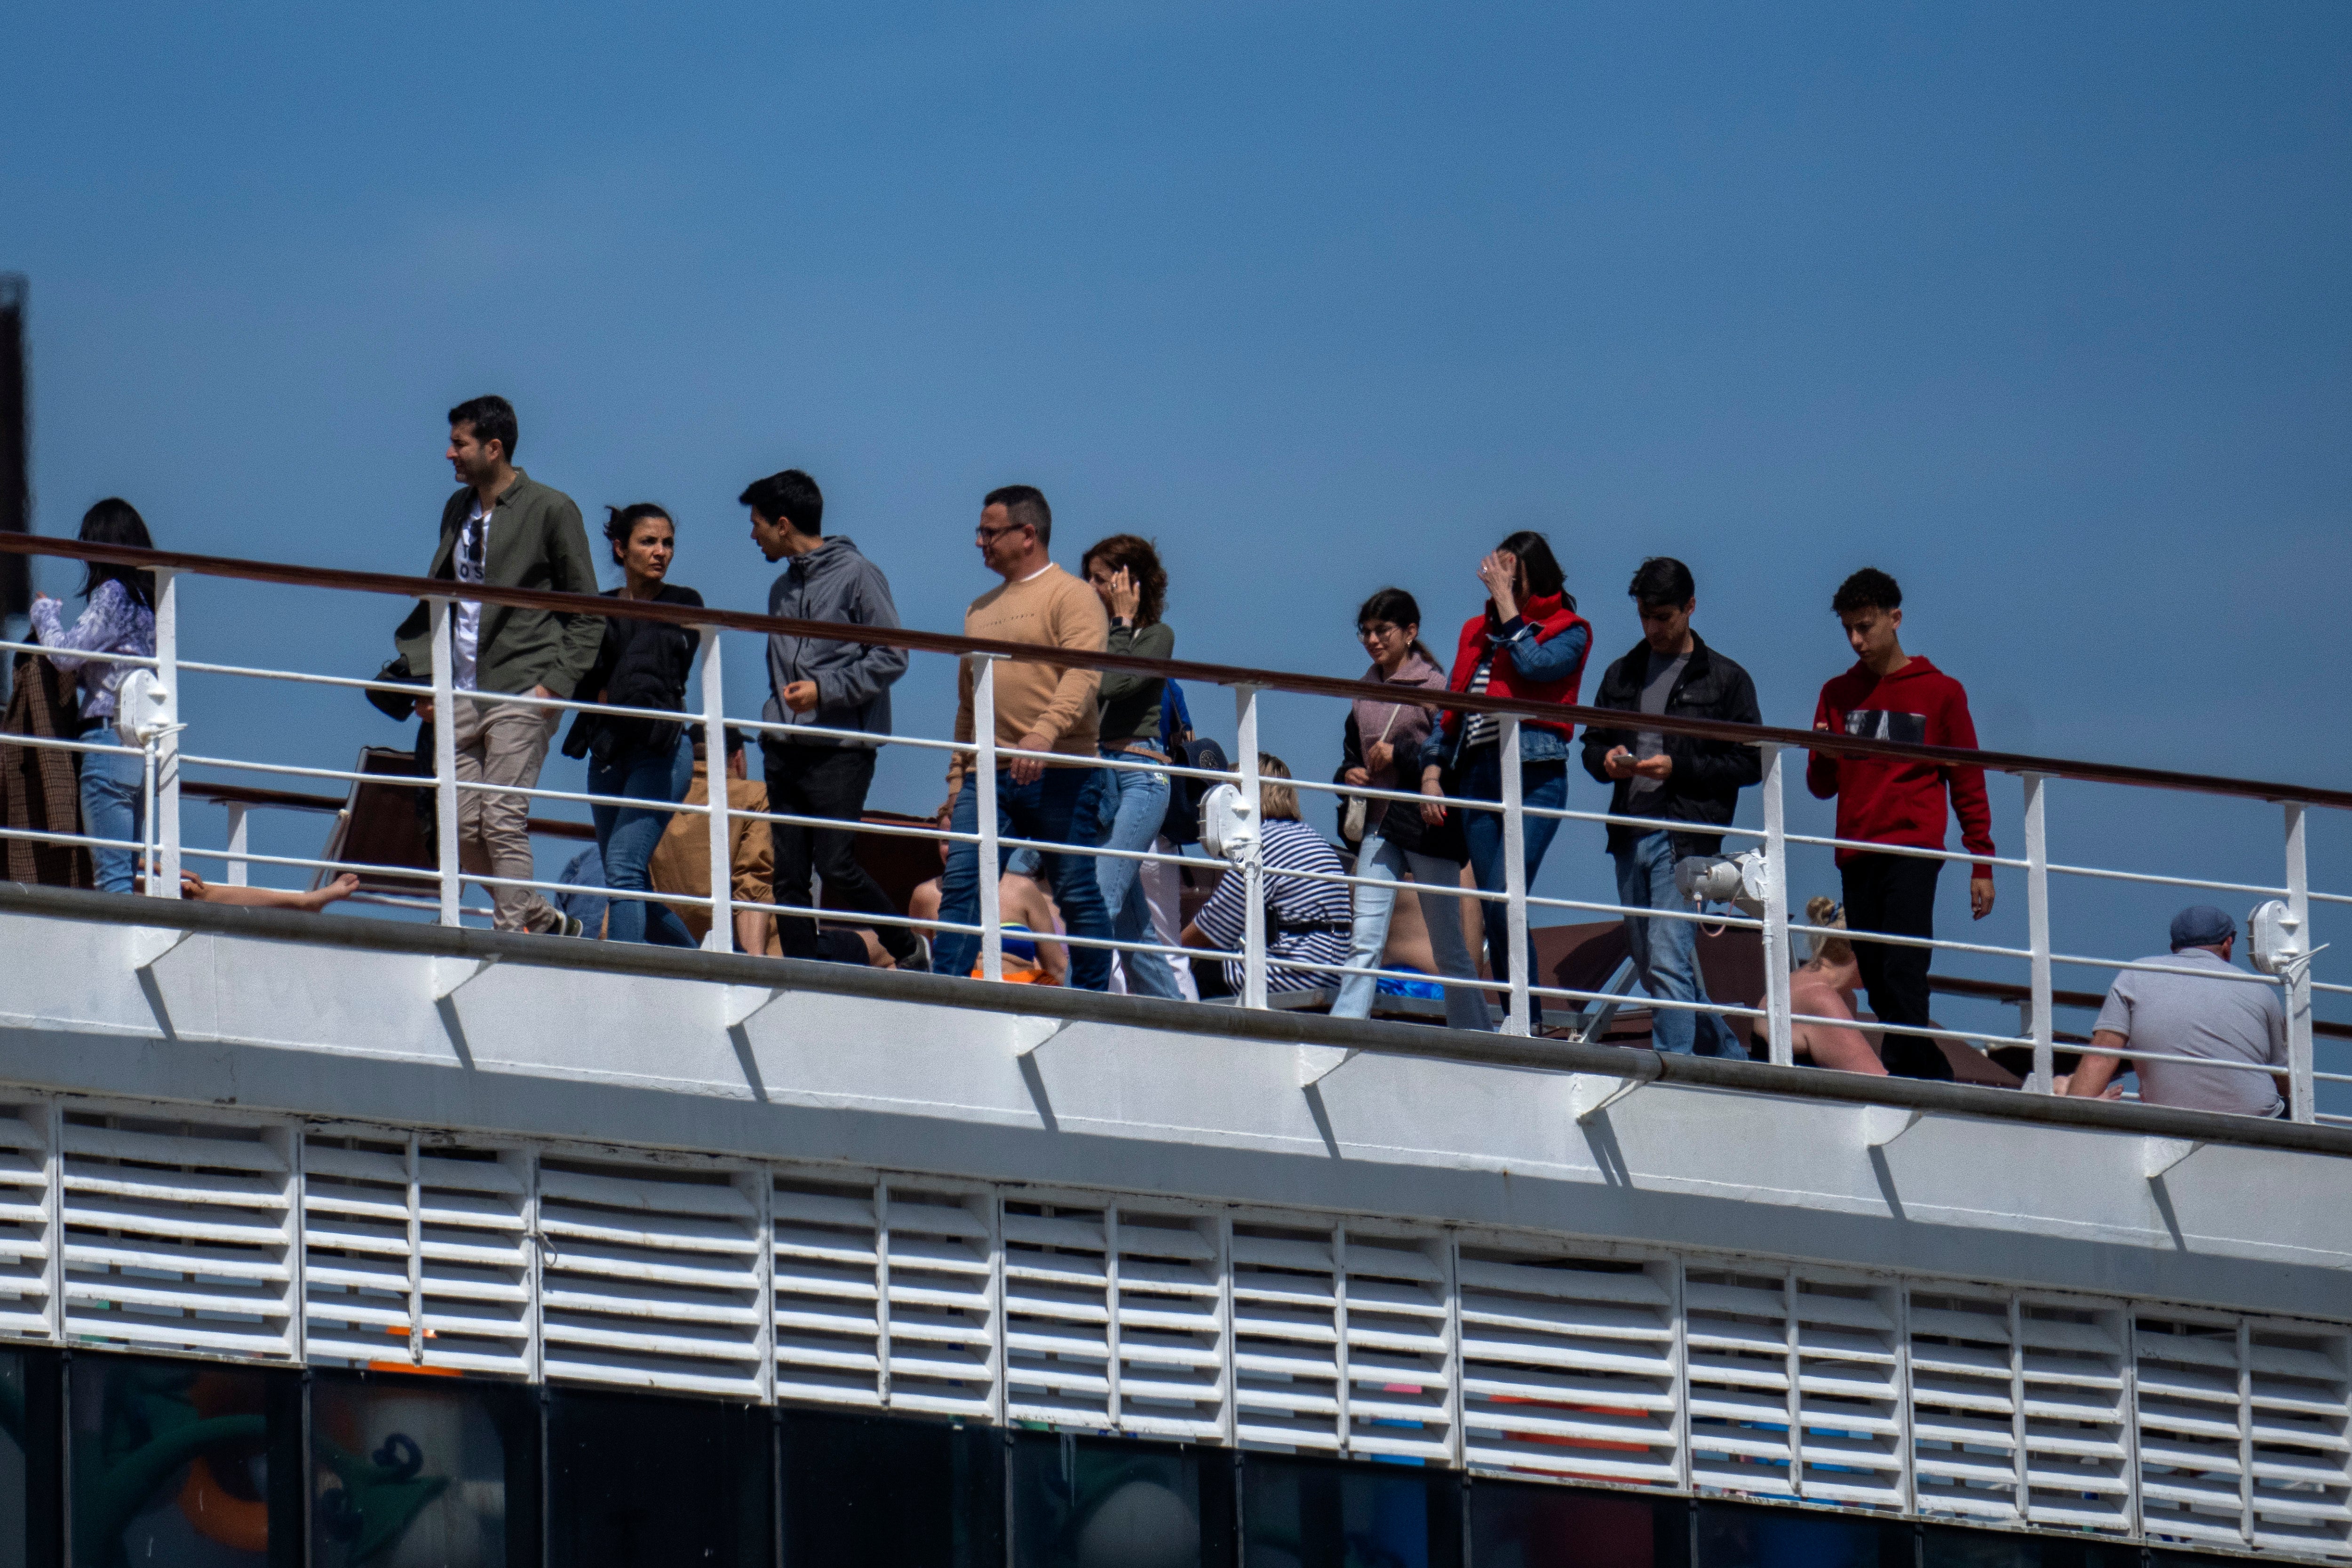 Passengers are photographed on the cruise ship moored in the port of Barcelona